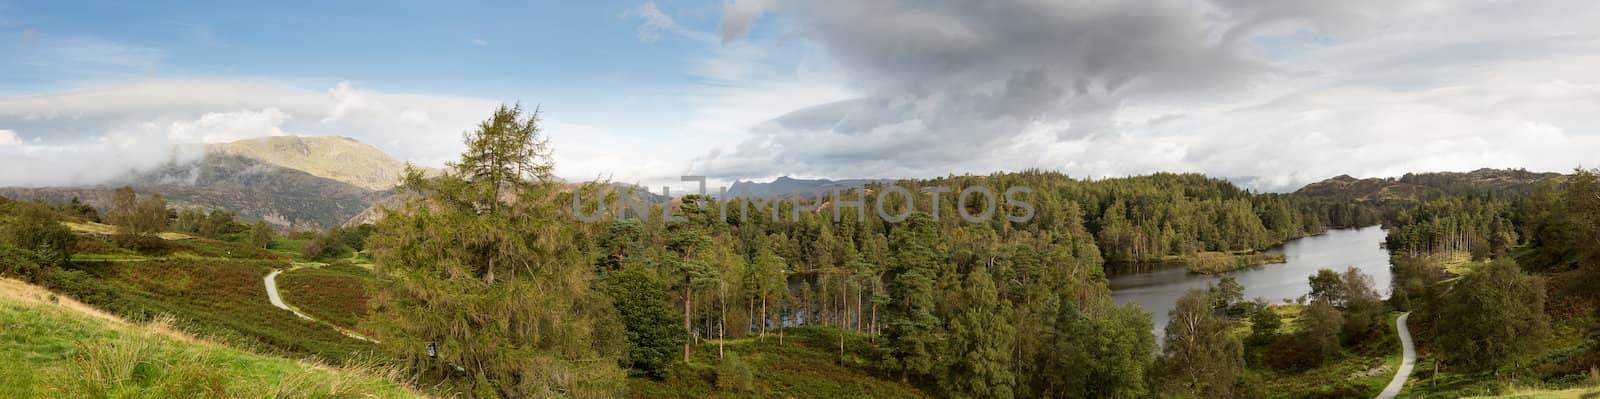 Panoramic view over Tarn Hows in English Lake District